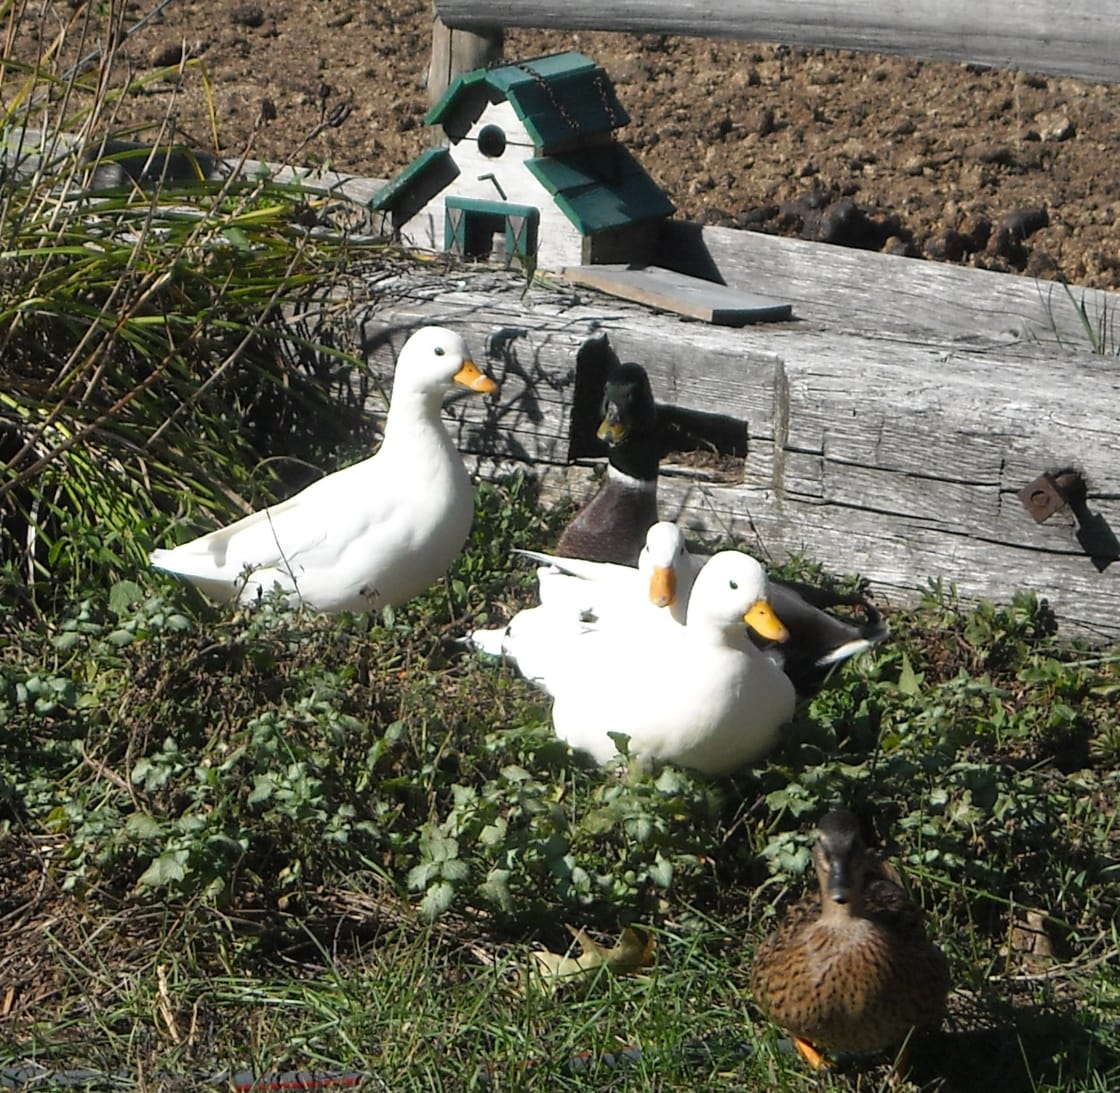 Call ducks can be found wandering the farm